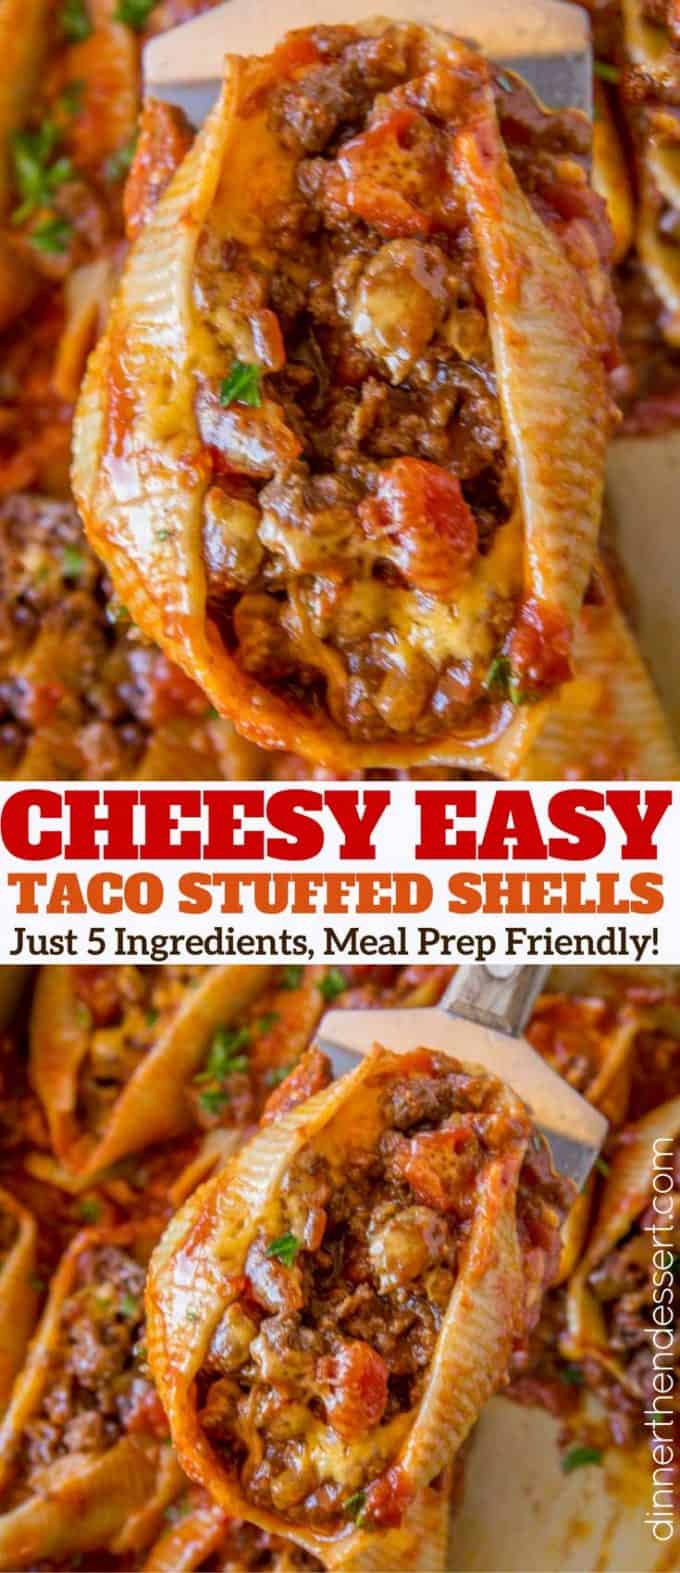 Cheesy Taco Stuffed Shells made with jumbo pasta shells, salsa, cheese and taco meat are the perfect EASY weeknight meal that you can prepare ahead of time too!